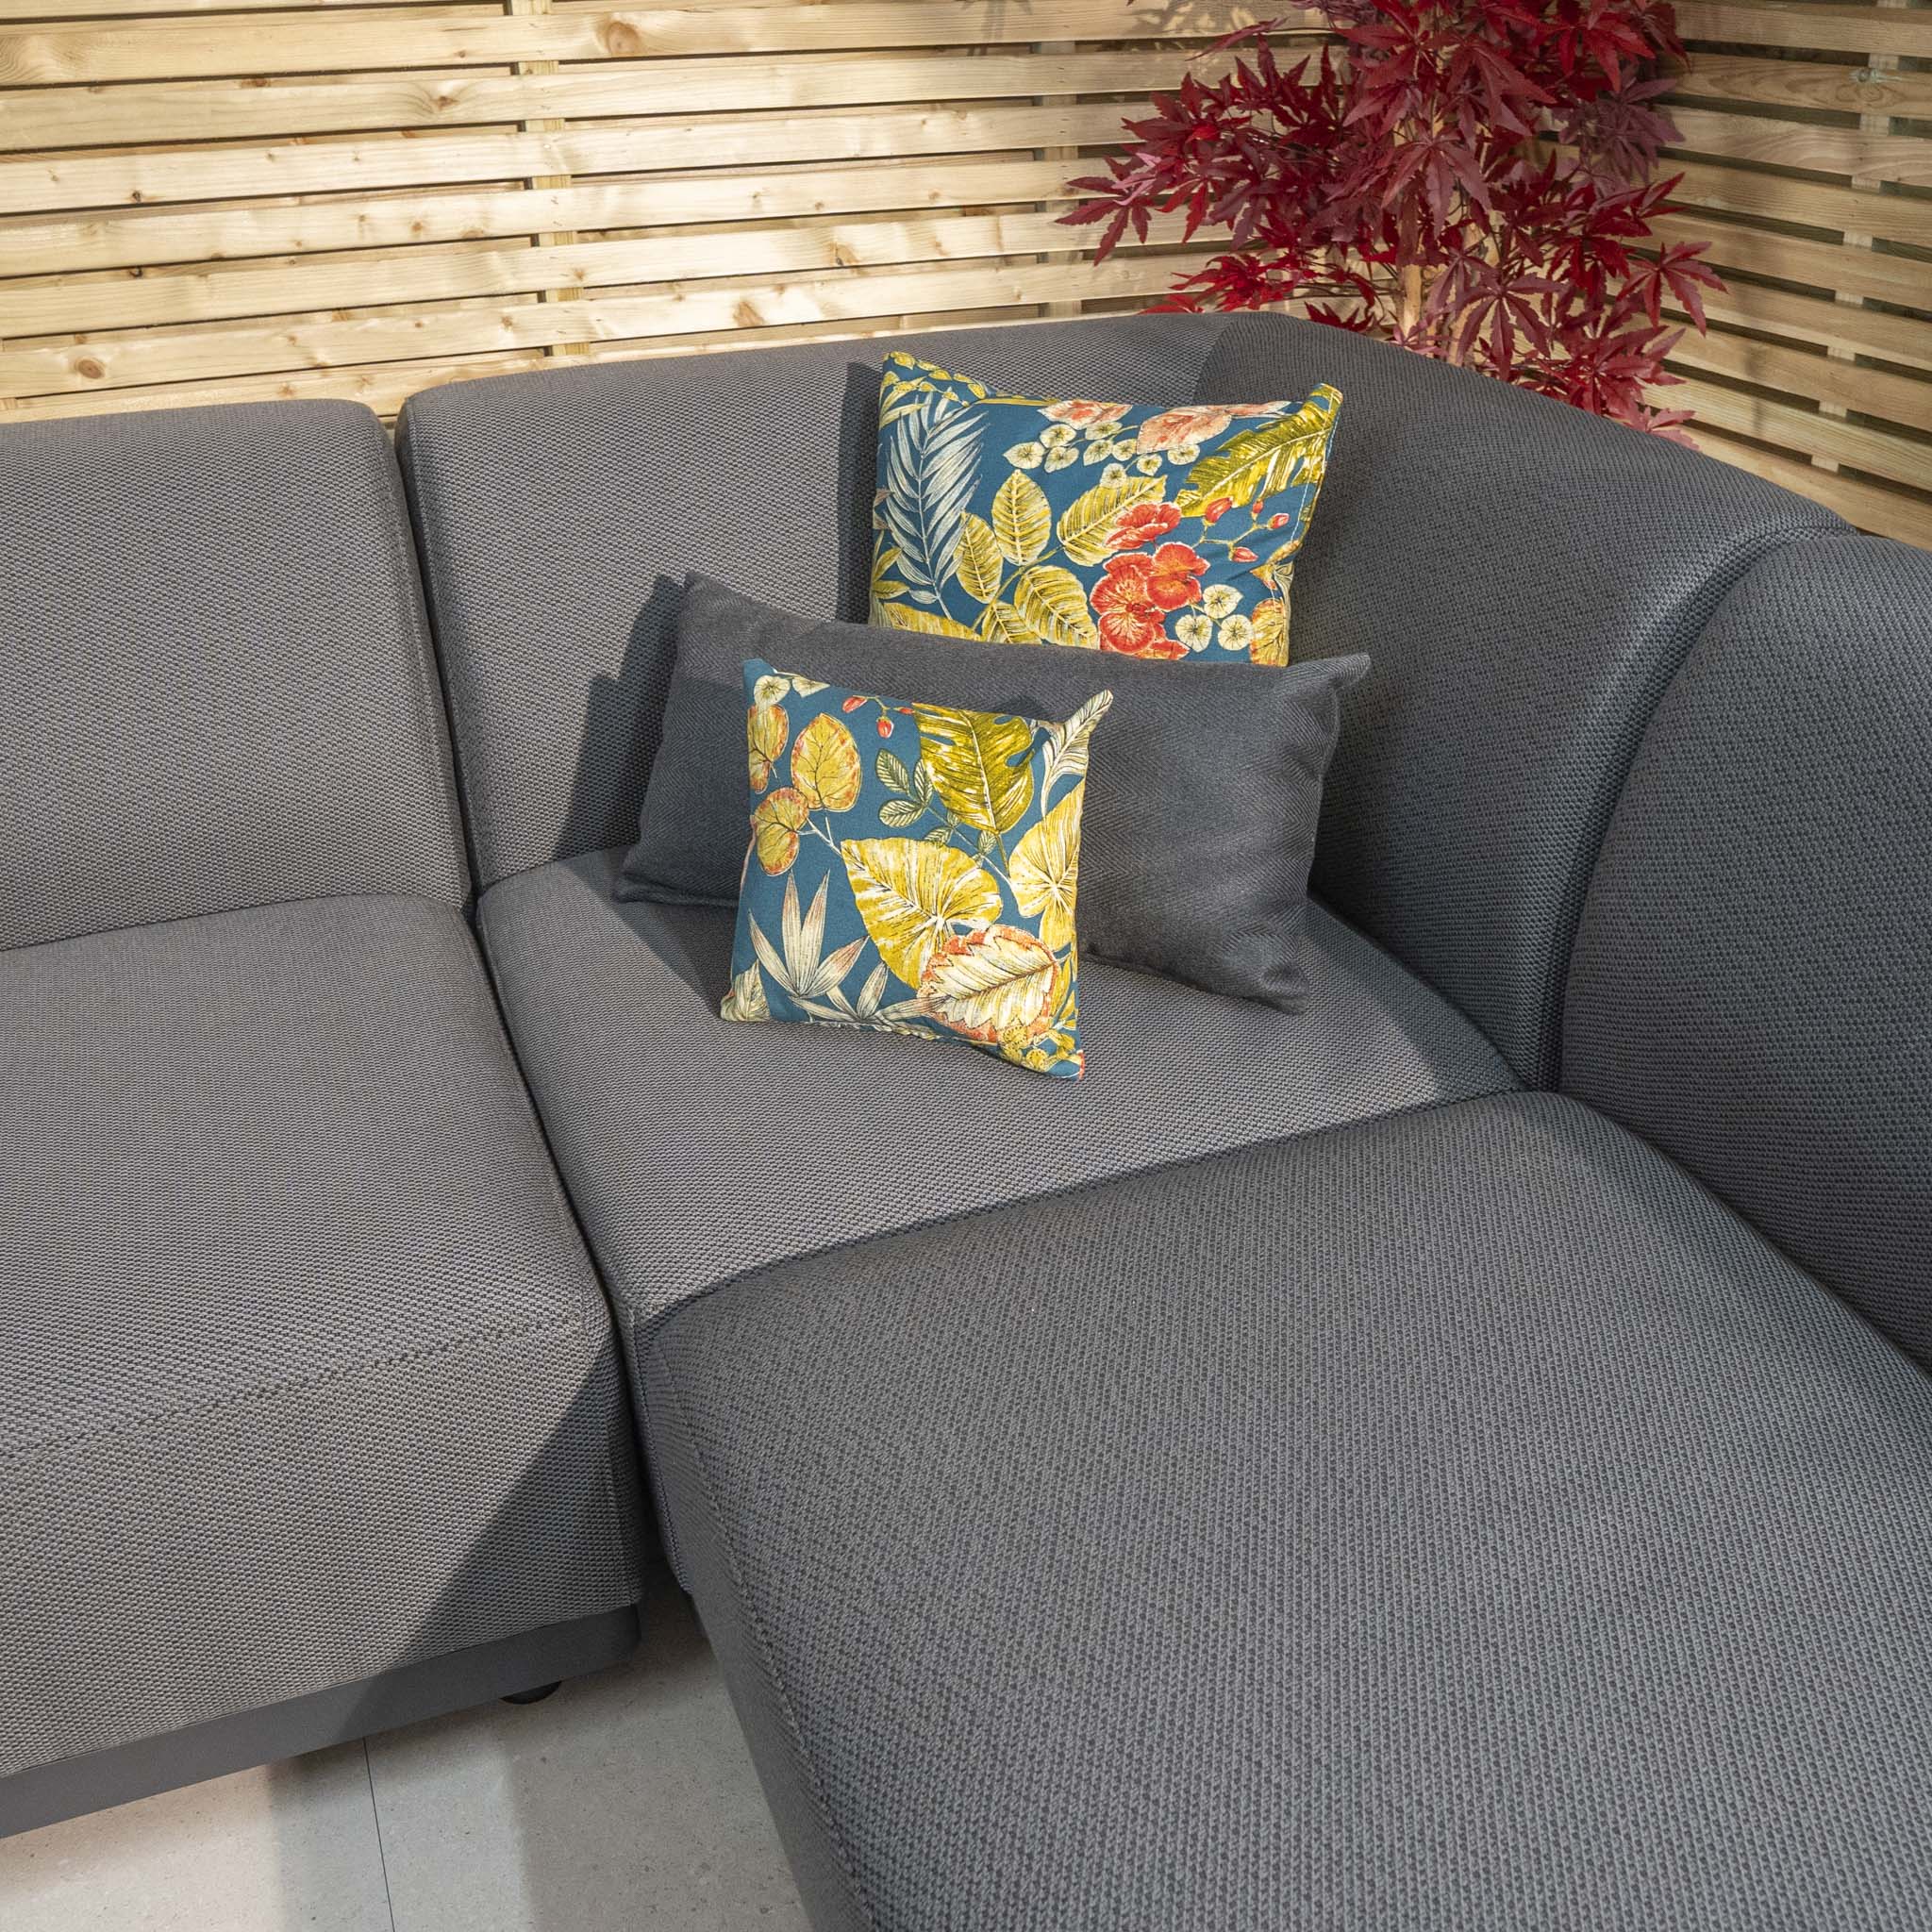 Luna Outdoor Fabric Corner Group Set with Coffee Table in Grey